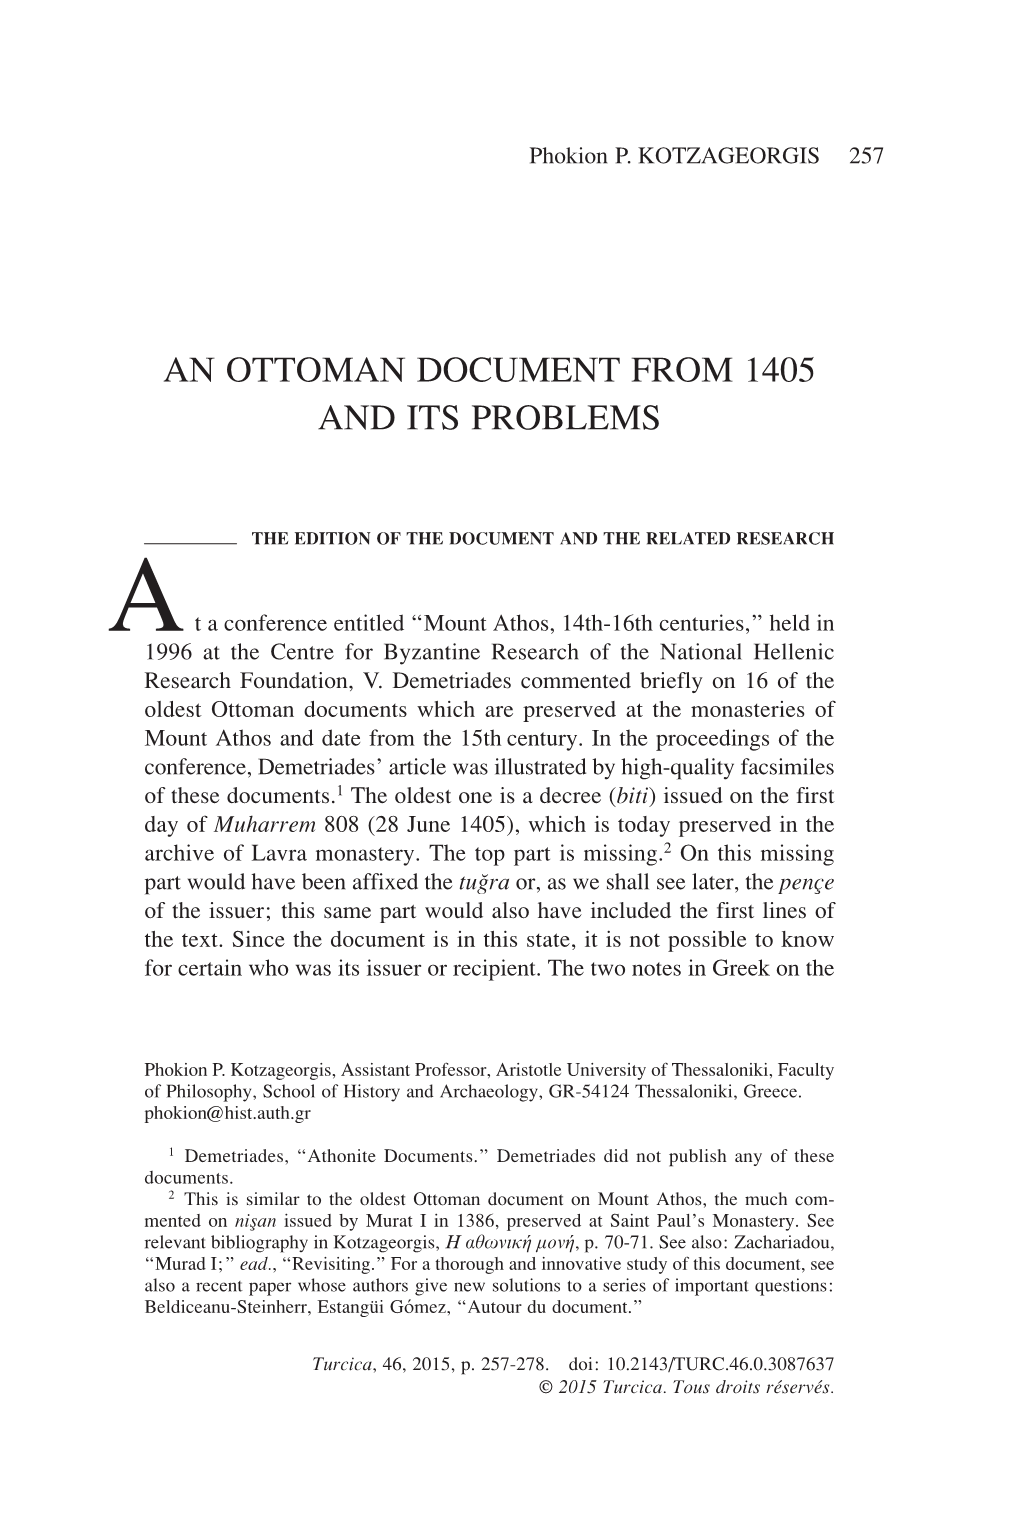 An Ottoman Document from 1405 and Its Problems